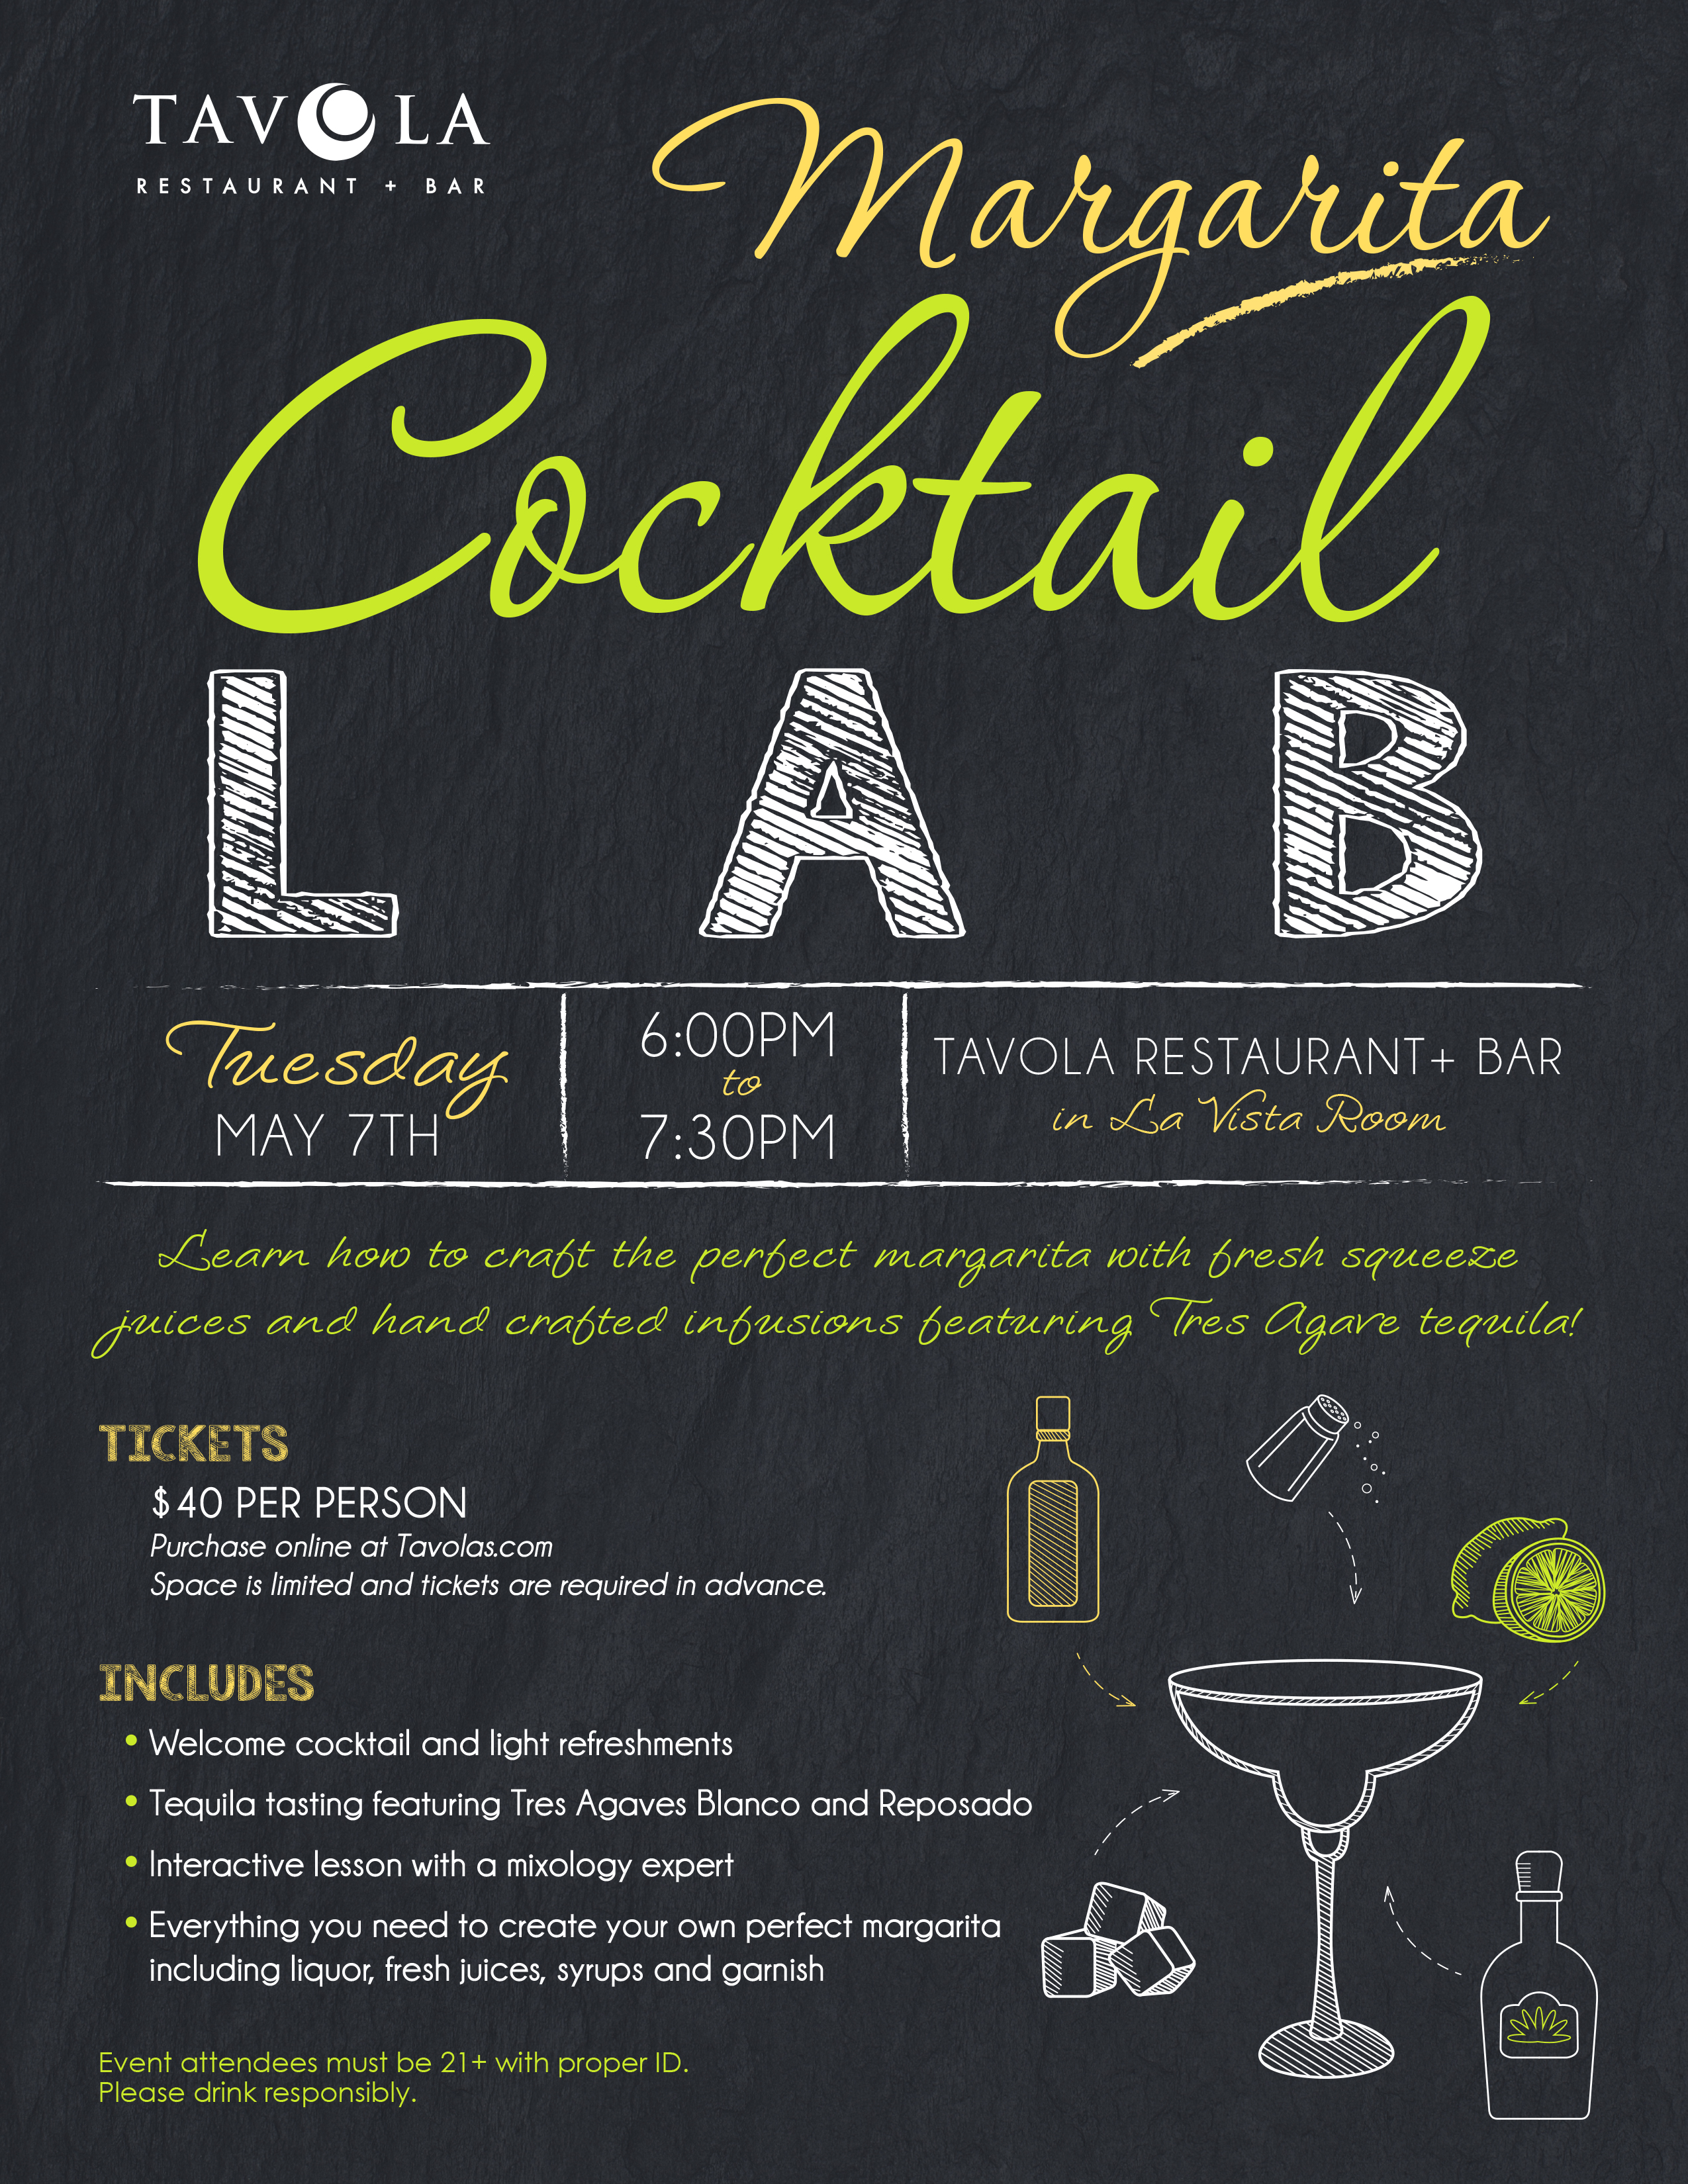 Black, yellow and white Margarita cocktail lab flyer detailing event info for May 7th cocktail lab function at Tavola.